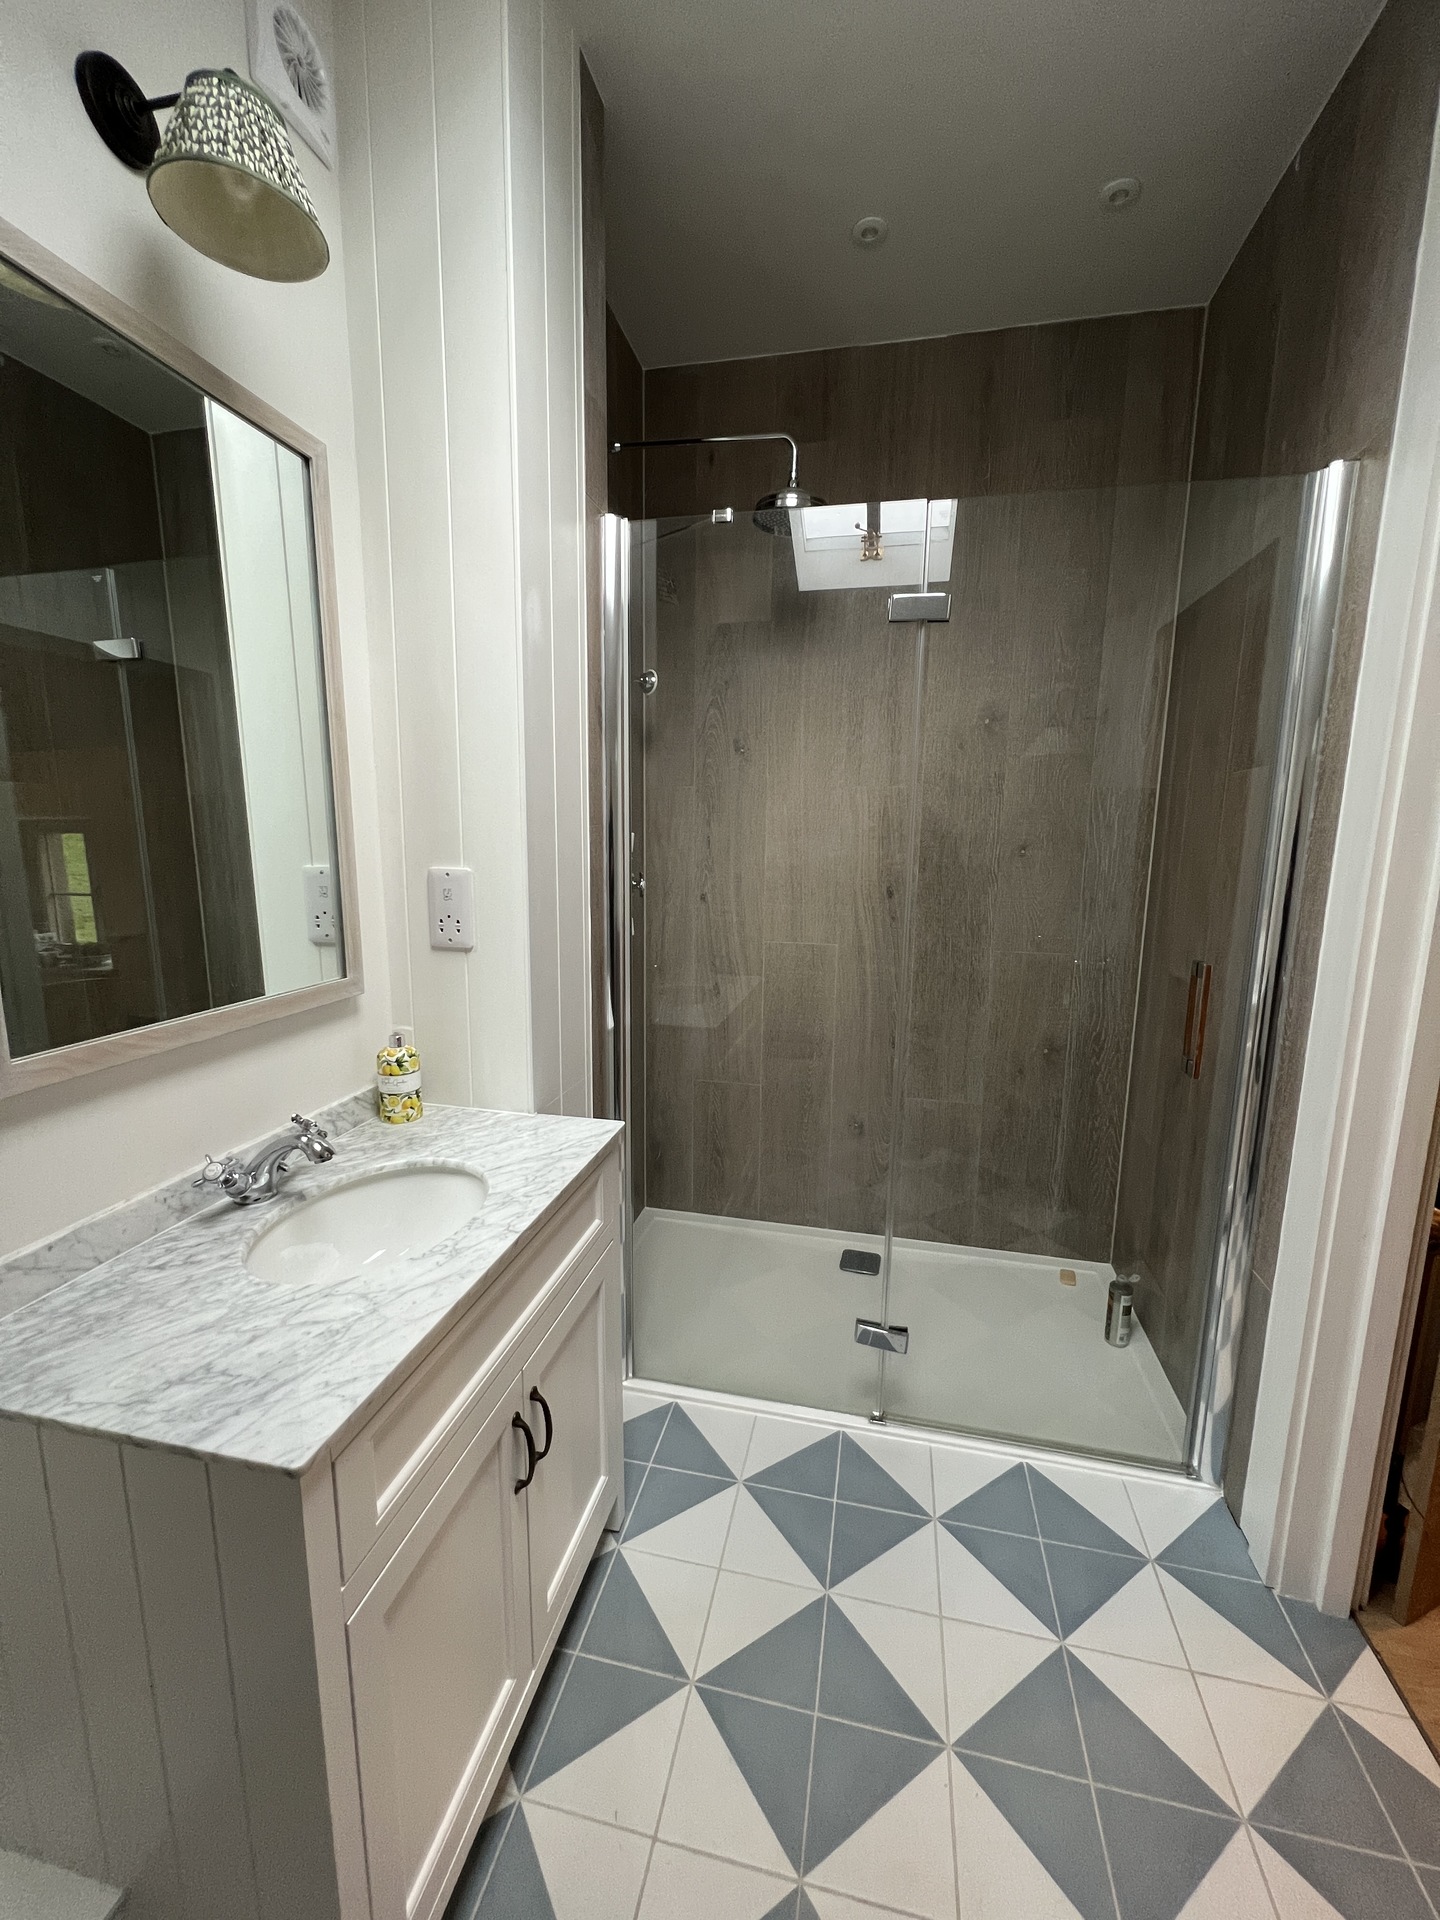 One of the completed bathrooms